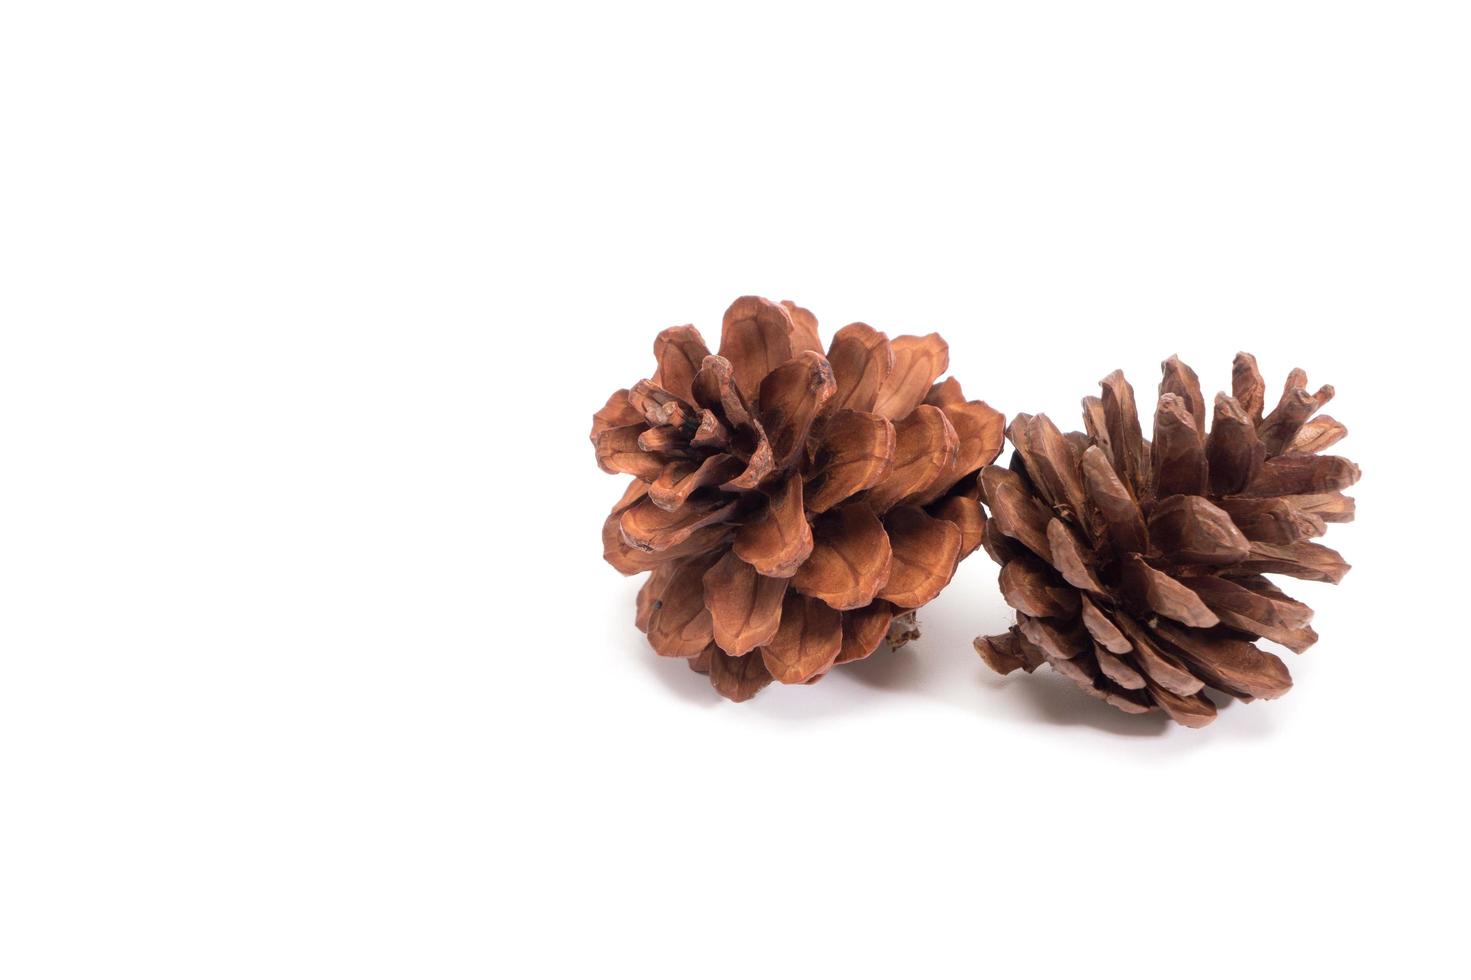 pine cone on white background for Christmas decorative photo